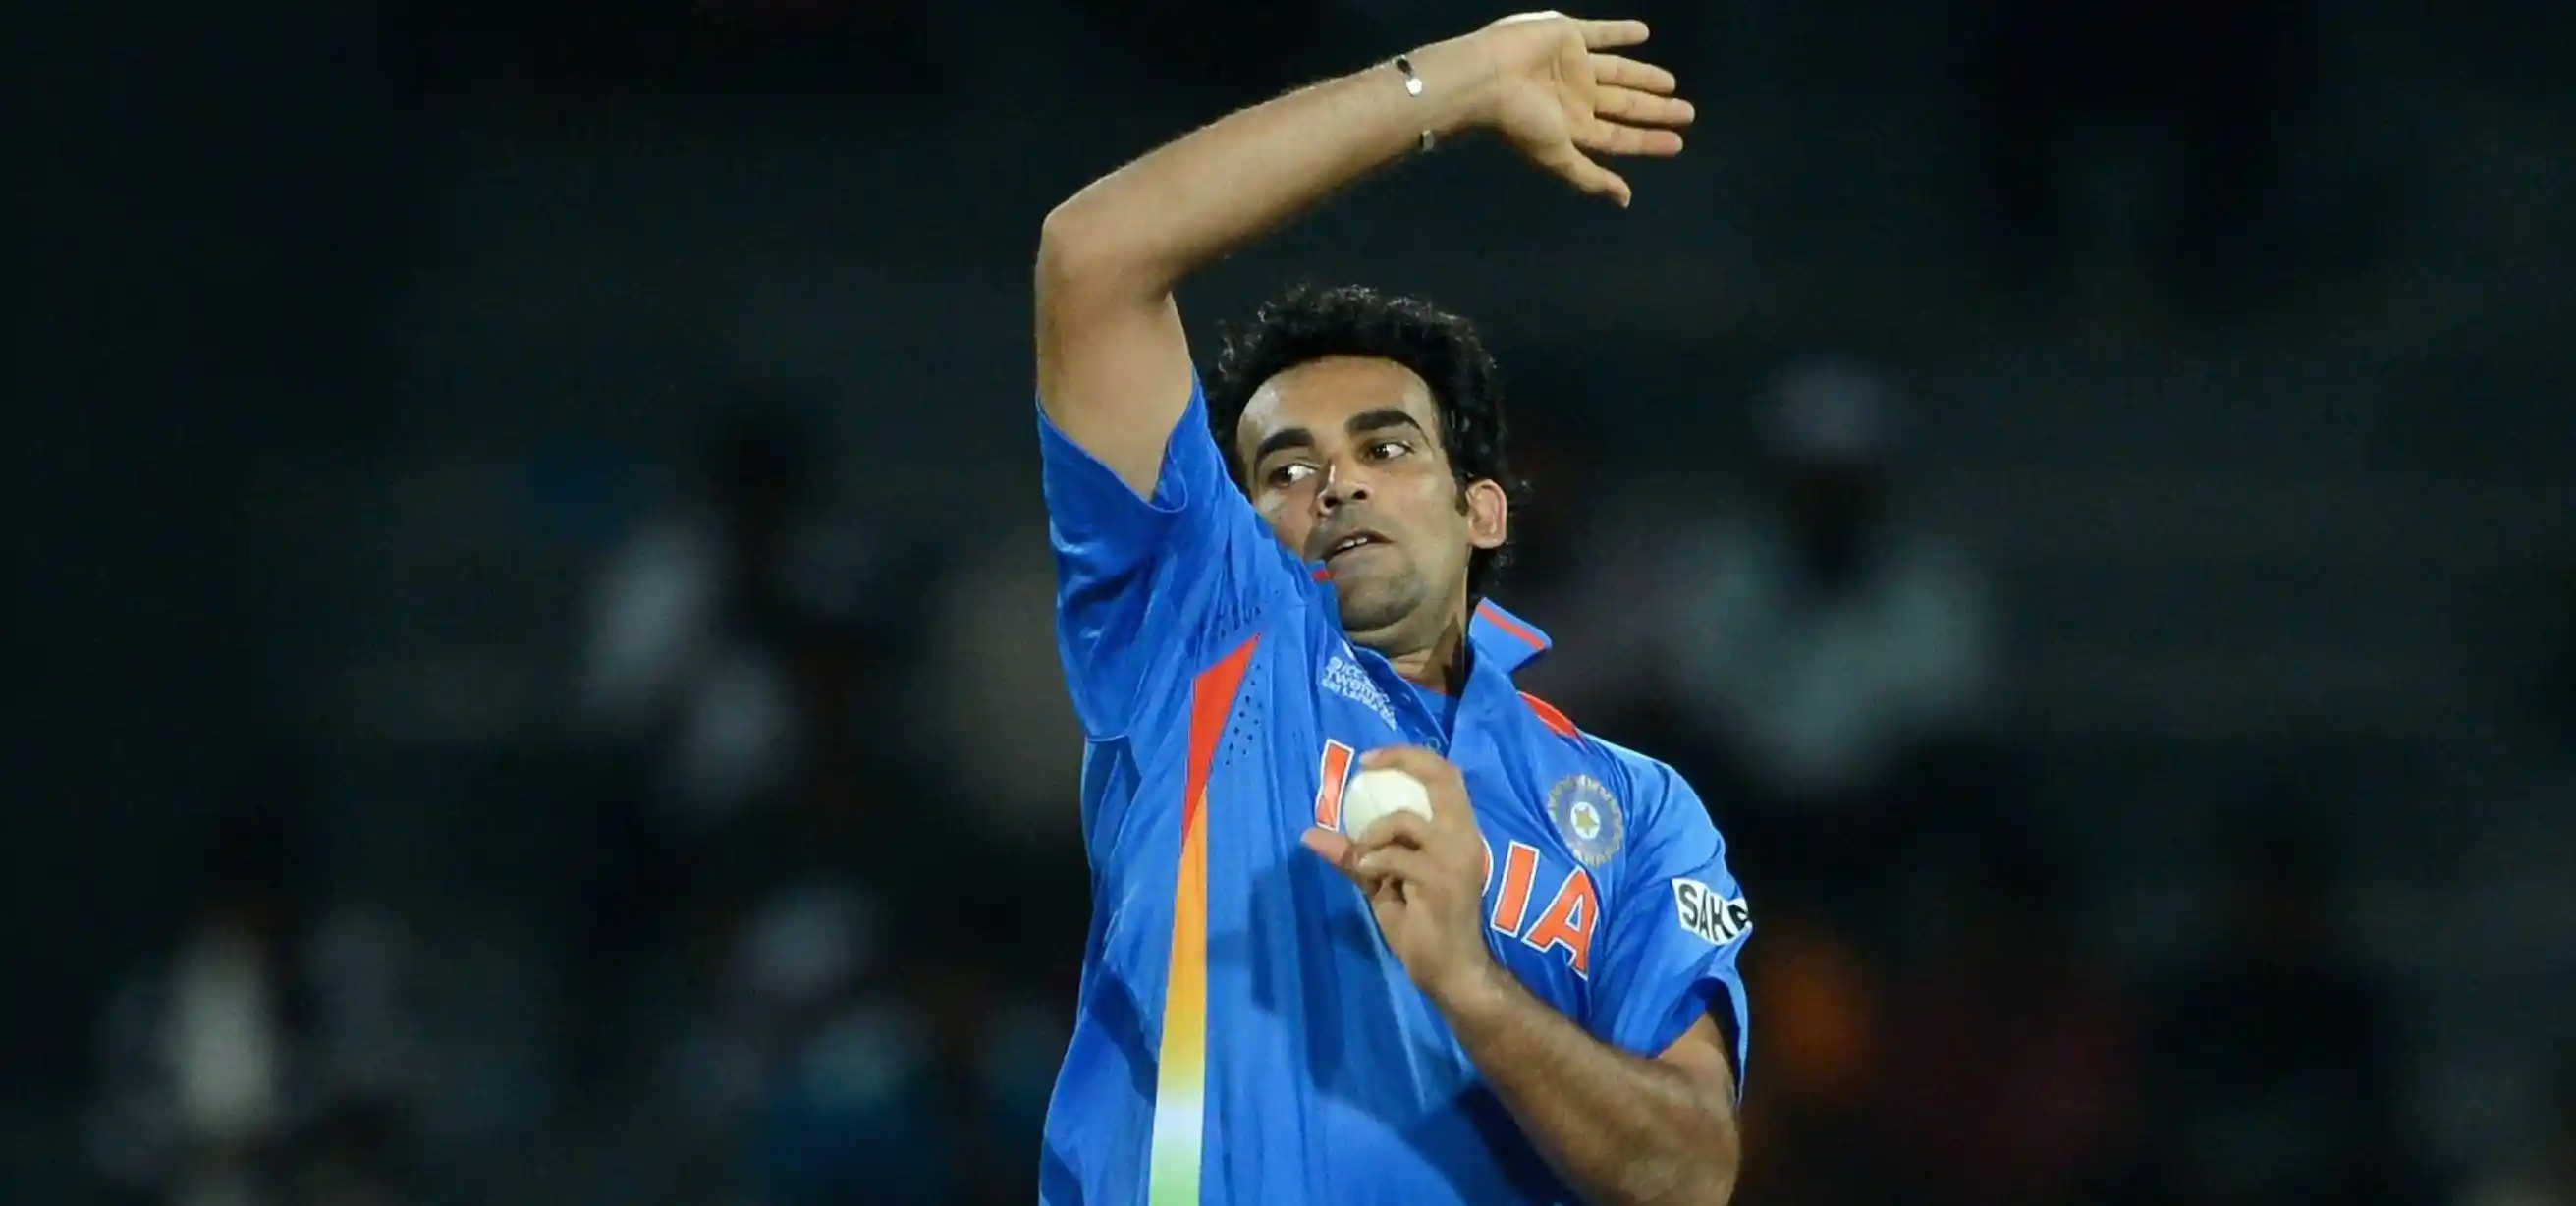 Zaheer khan was the first player to bowl 'knuckle ball' in the International match; Image Source: Indiatimes